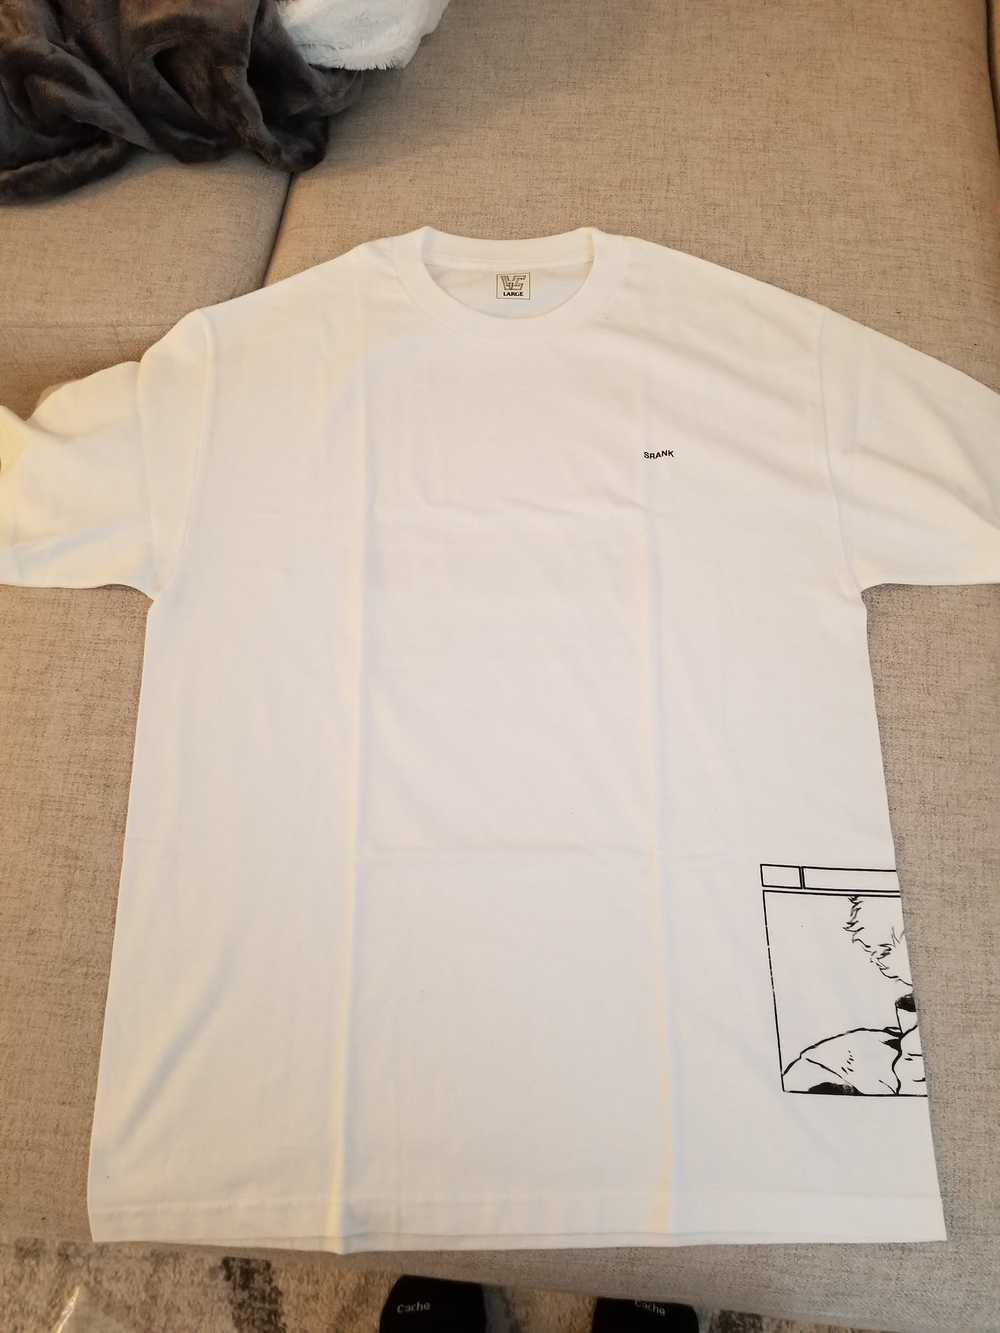 Hidden Characters Auction #1 1 of 1 Tee - White - image 2